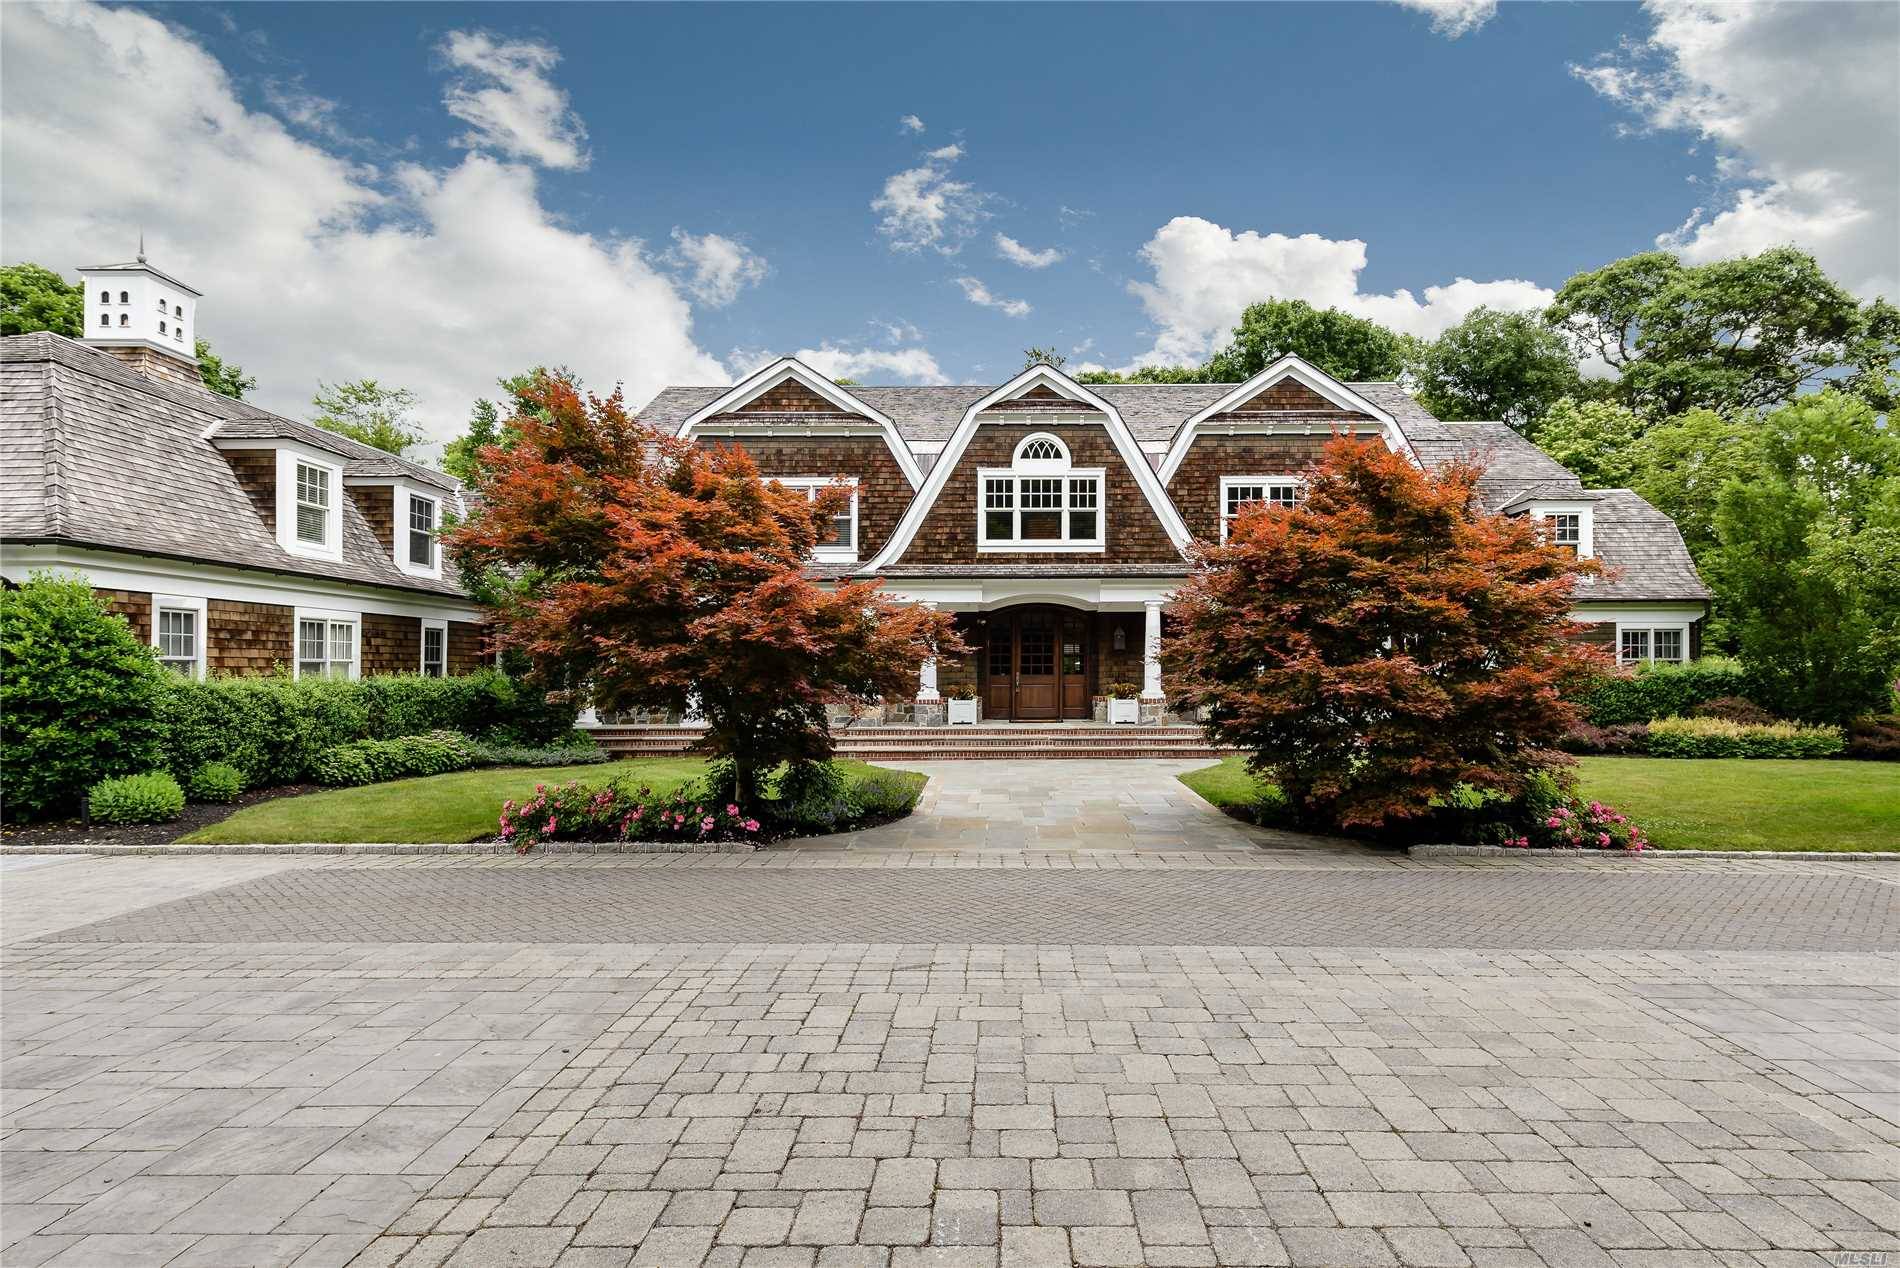 A Private Country Lane Leads To Builder's Own Mint Condition Southampton Shingle Style Home Set On 2.